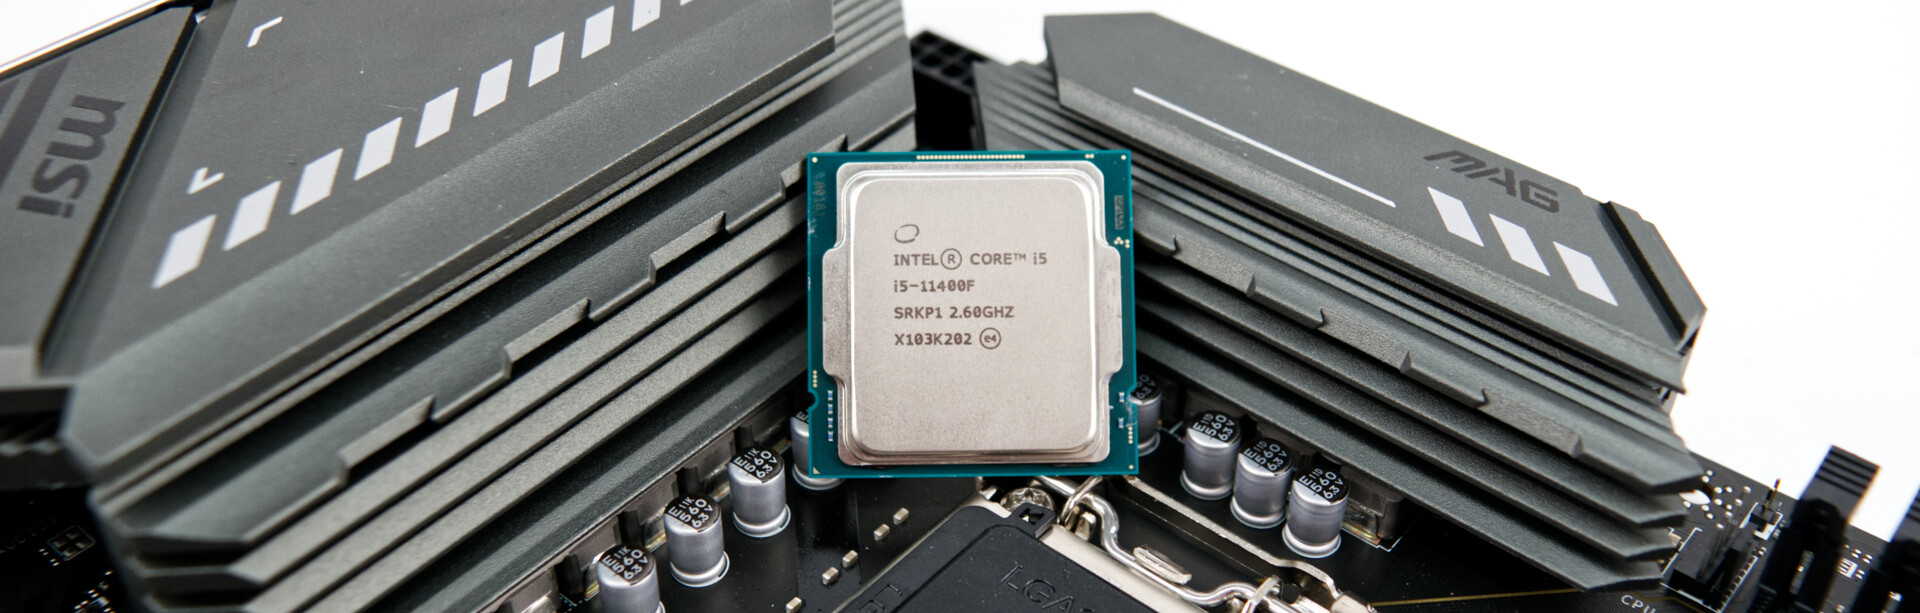 Intel Core i5-10400F Review - Six Cores with HT for Under $200 - Office &  Productivity